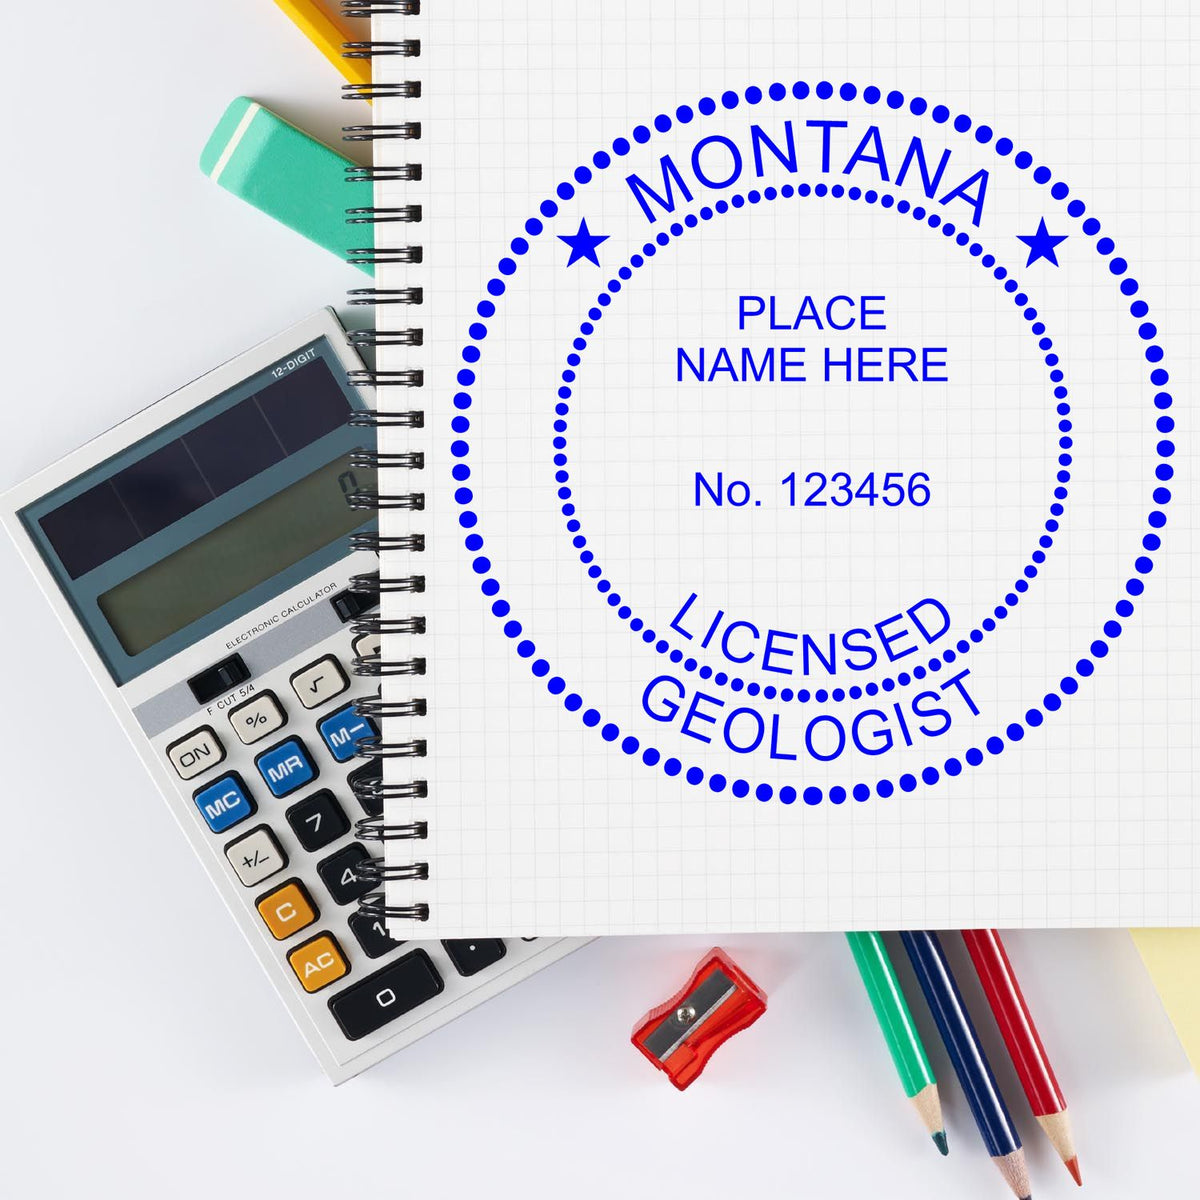 A lifestyle photo showing a stamped image of the Digital Montana Geologist Stamp, Electronic Seal for Montana Geologist on a piece of paper